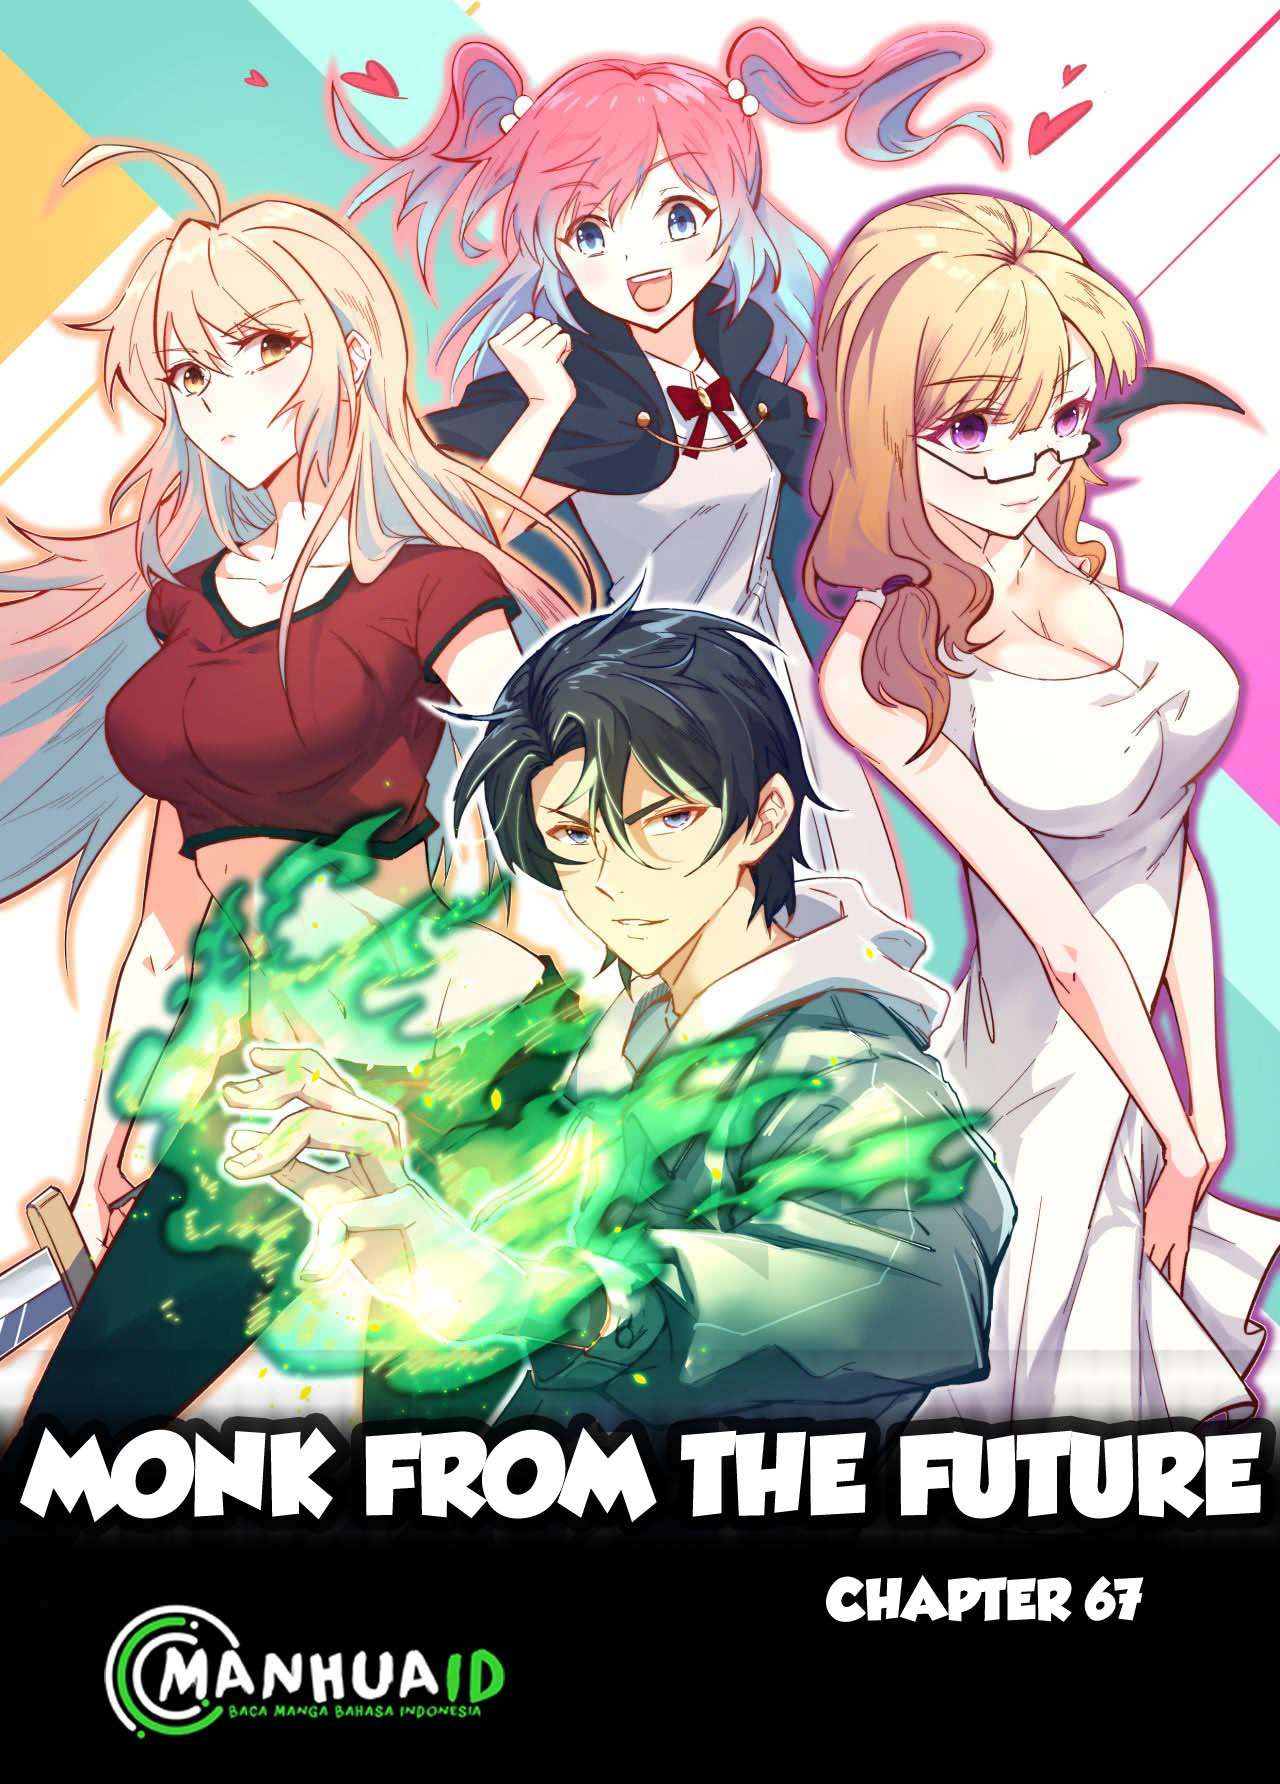 Monk From the Future Chapter 67